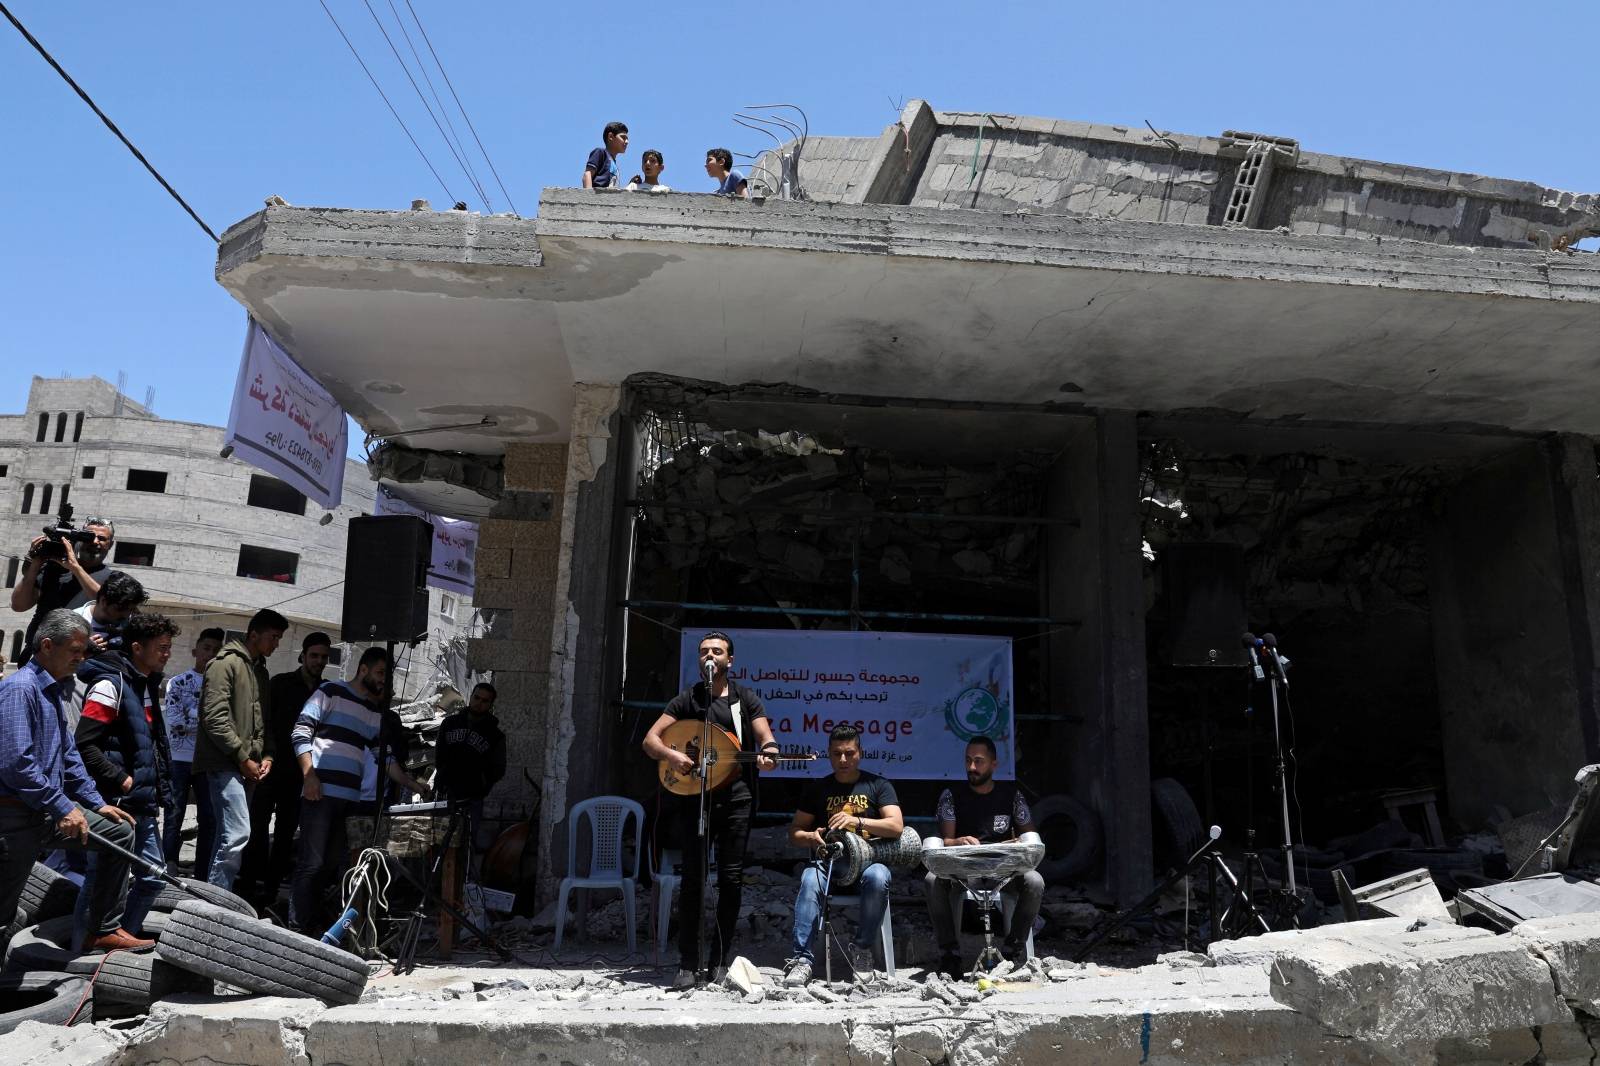 Palestinian singer performs during a musical event calling to boycott the Eurovision Song Contest hosted by Israel, in Gaza City